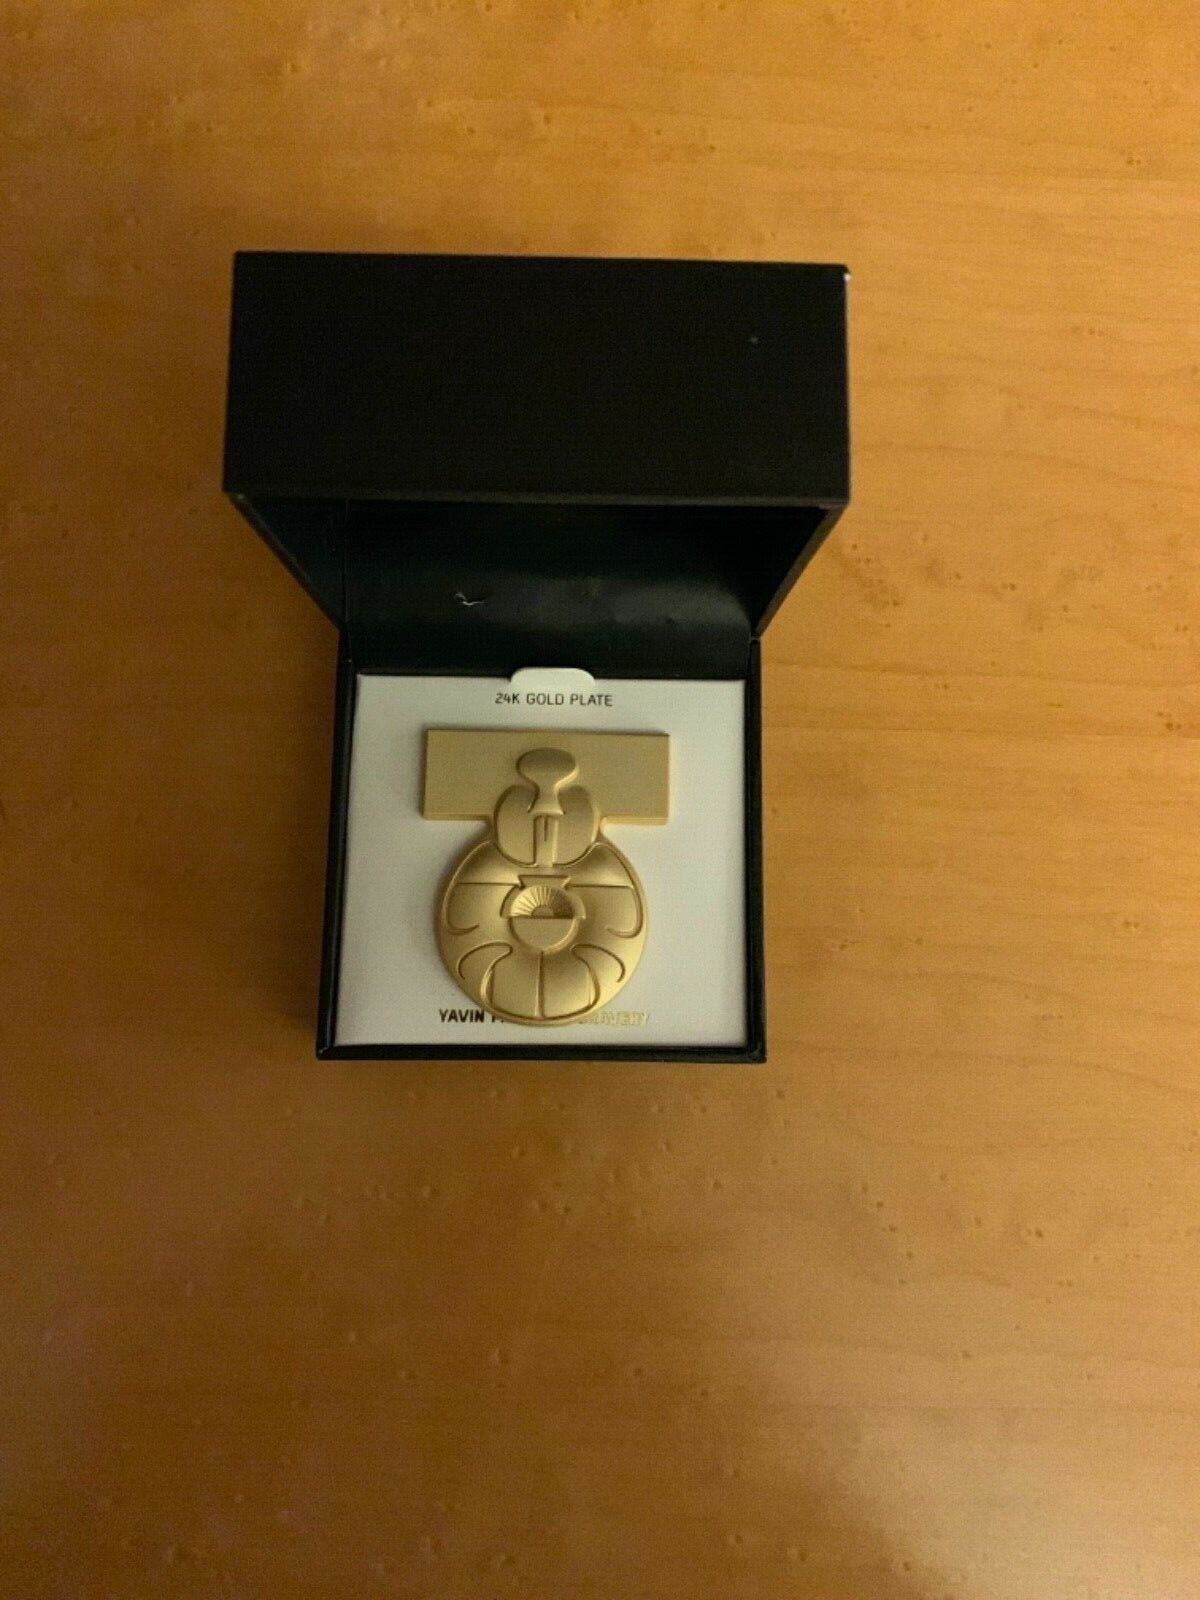 Star Wars Celebration Exclusive Limited Edition 24k Gold Plate Yavin Pin 2019 Lt